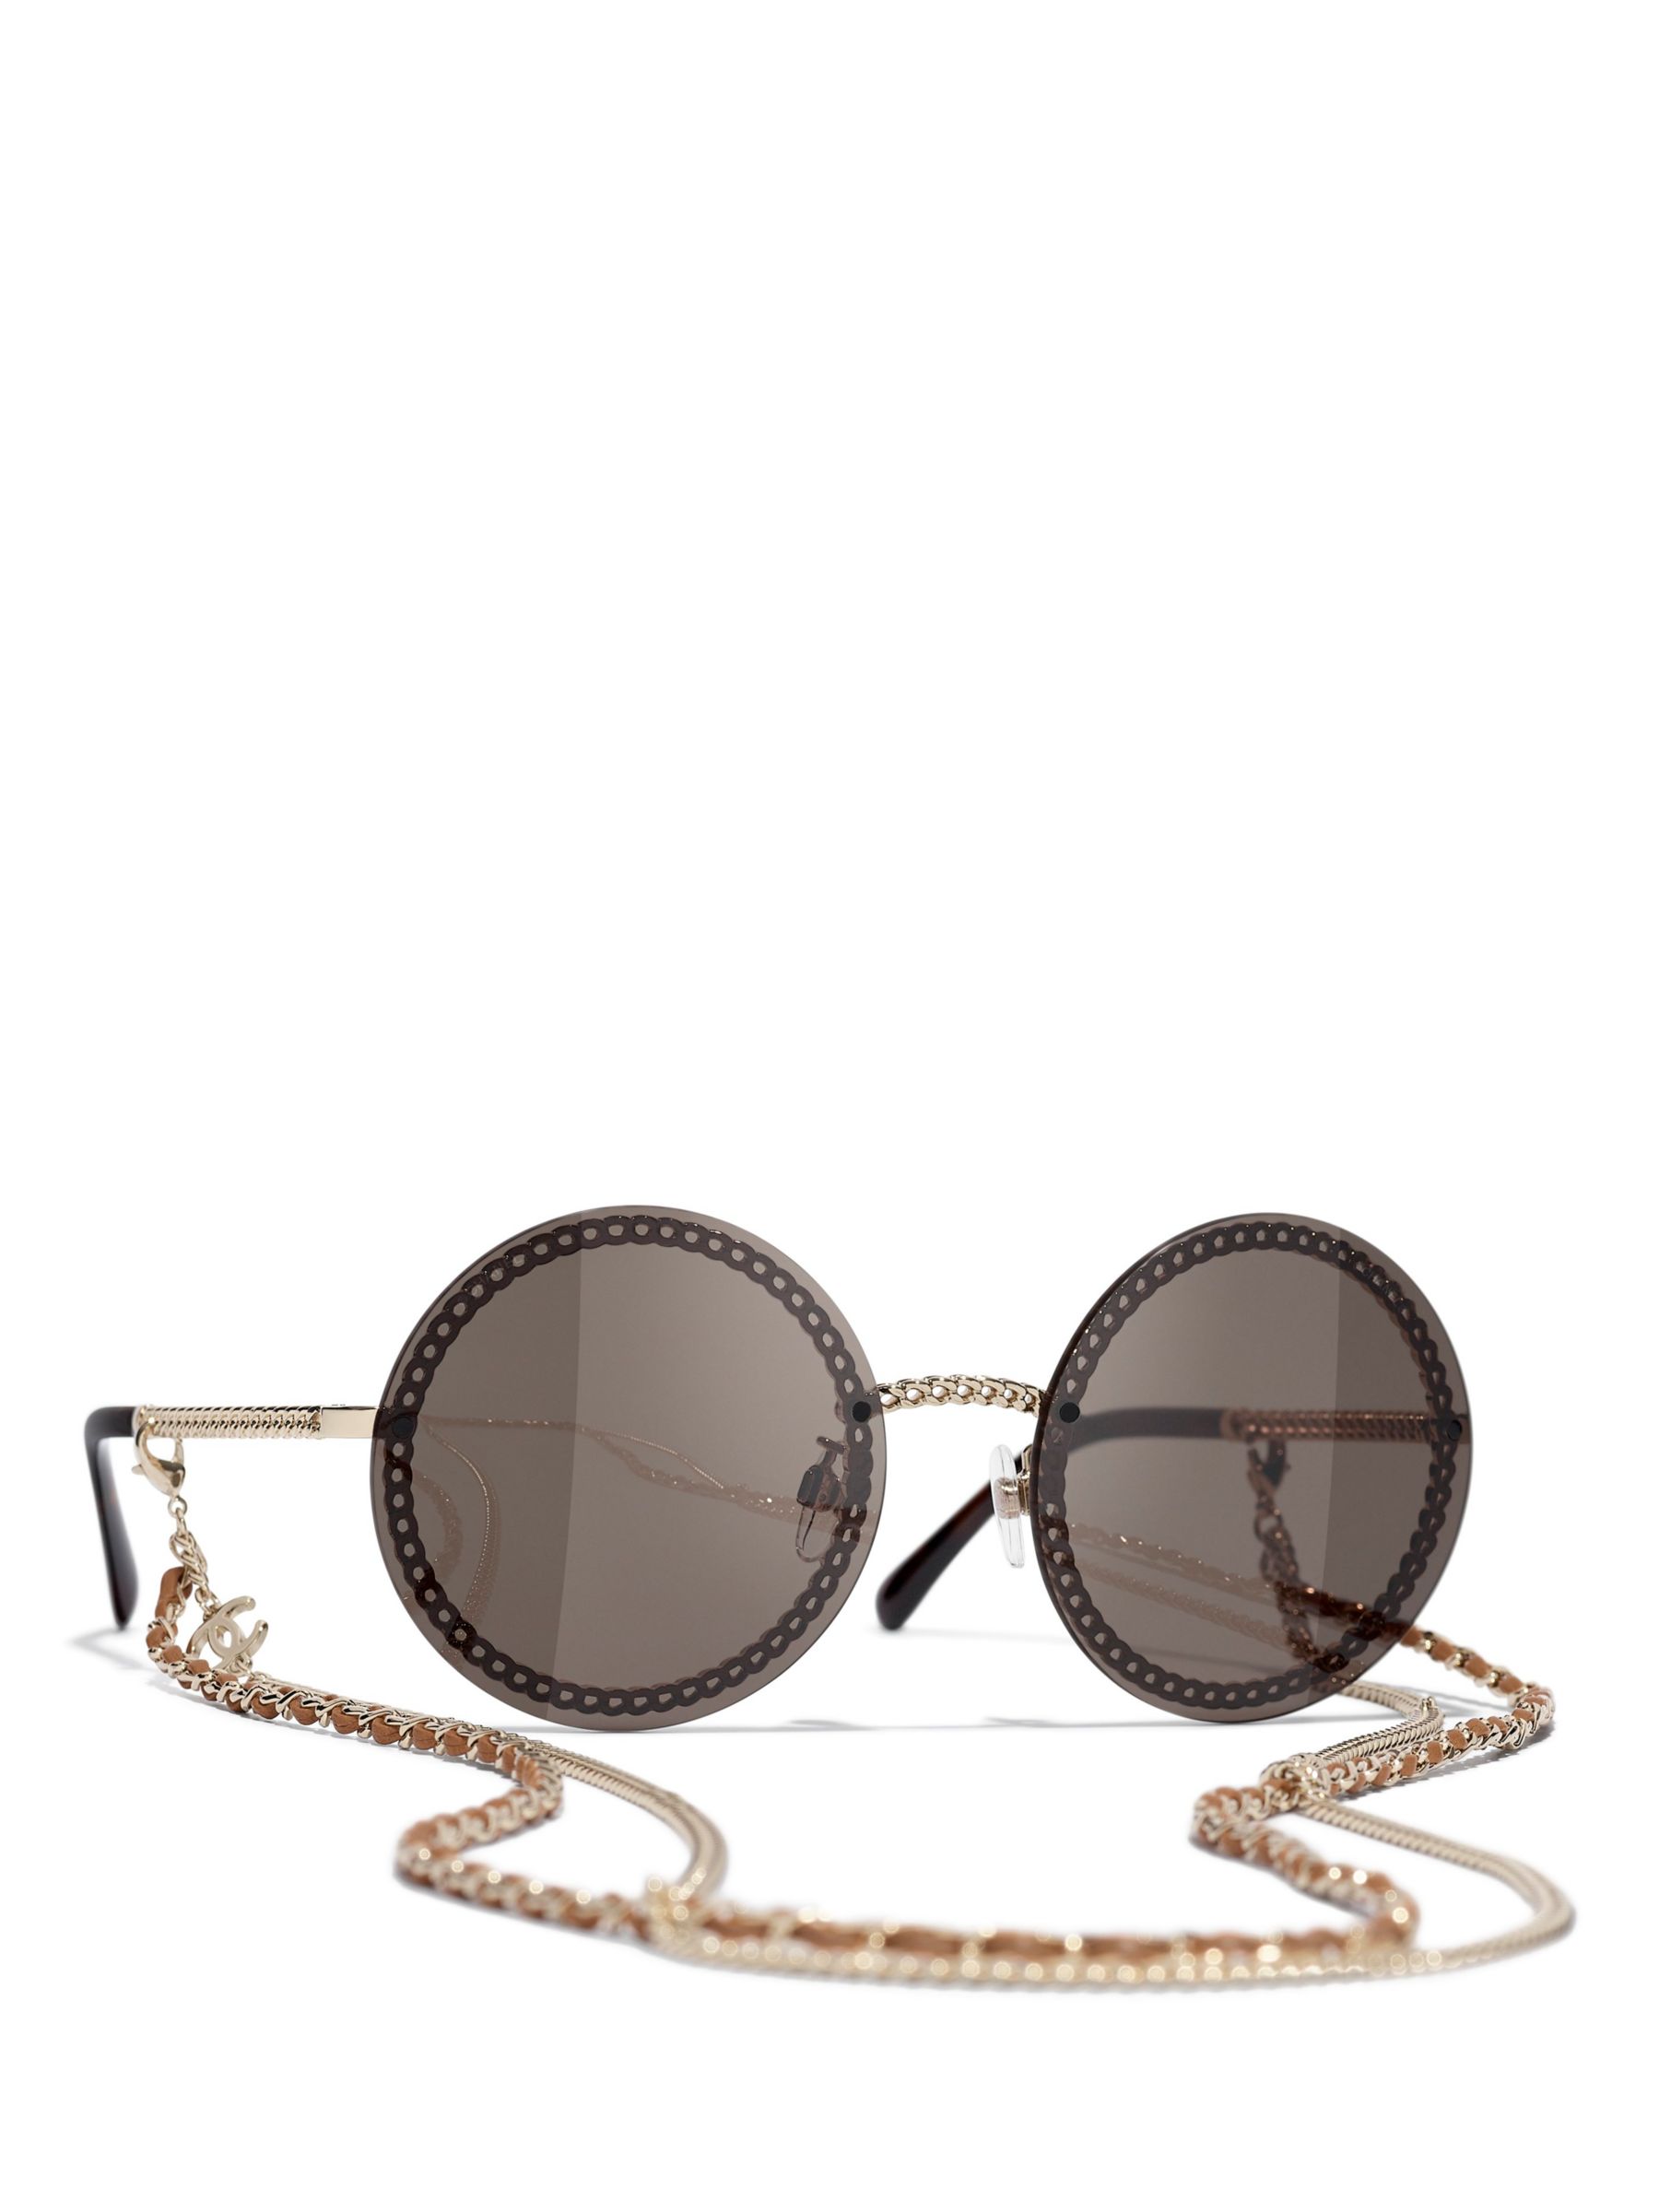 CHANEL Round Sunglasses CH4245 Pale Gold/Brown at John Lewis & Partners